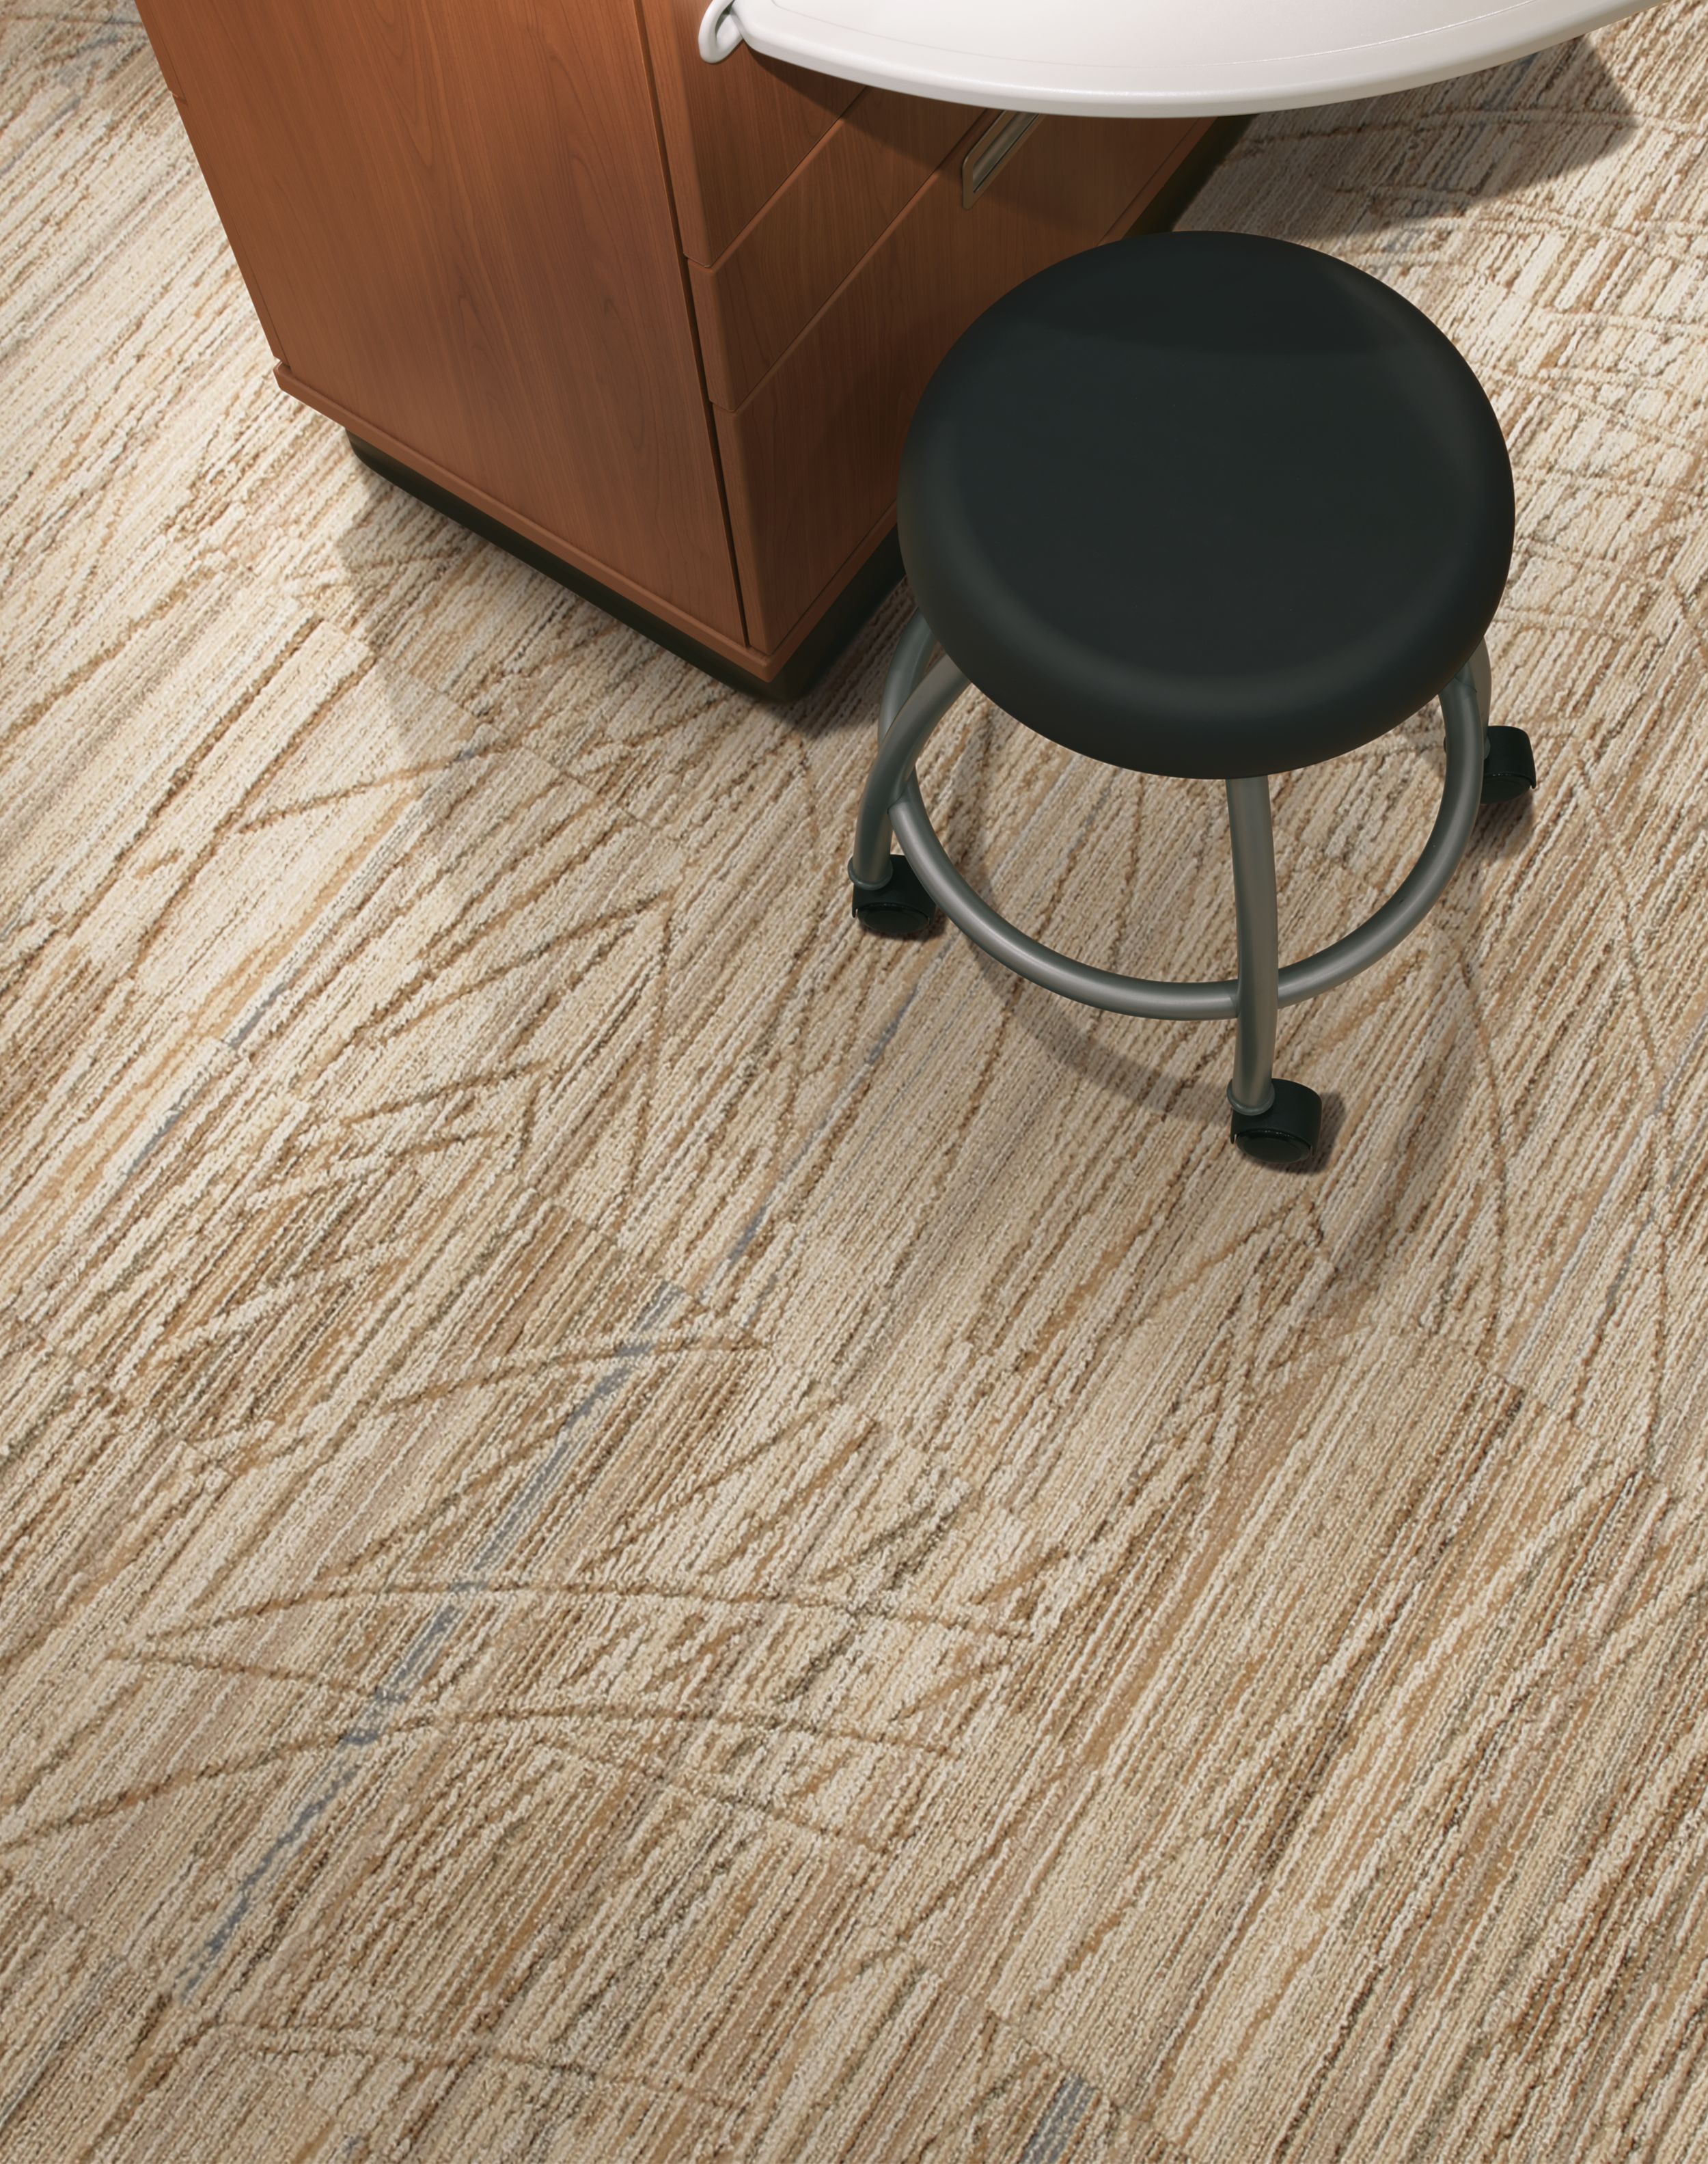 Interface Prairie Grass carpet tile in close up view with stool and cabinet imagen número 6